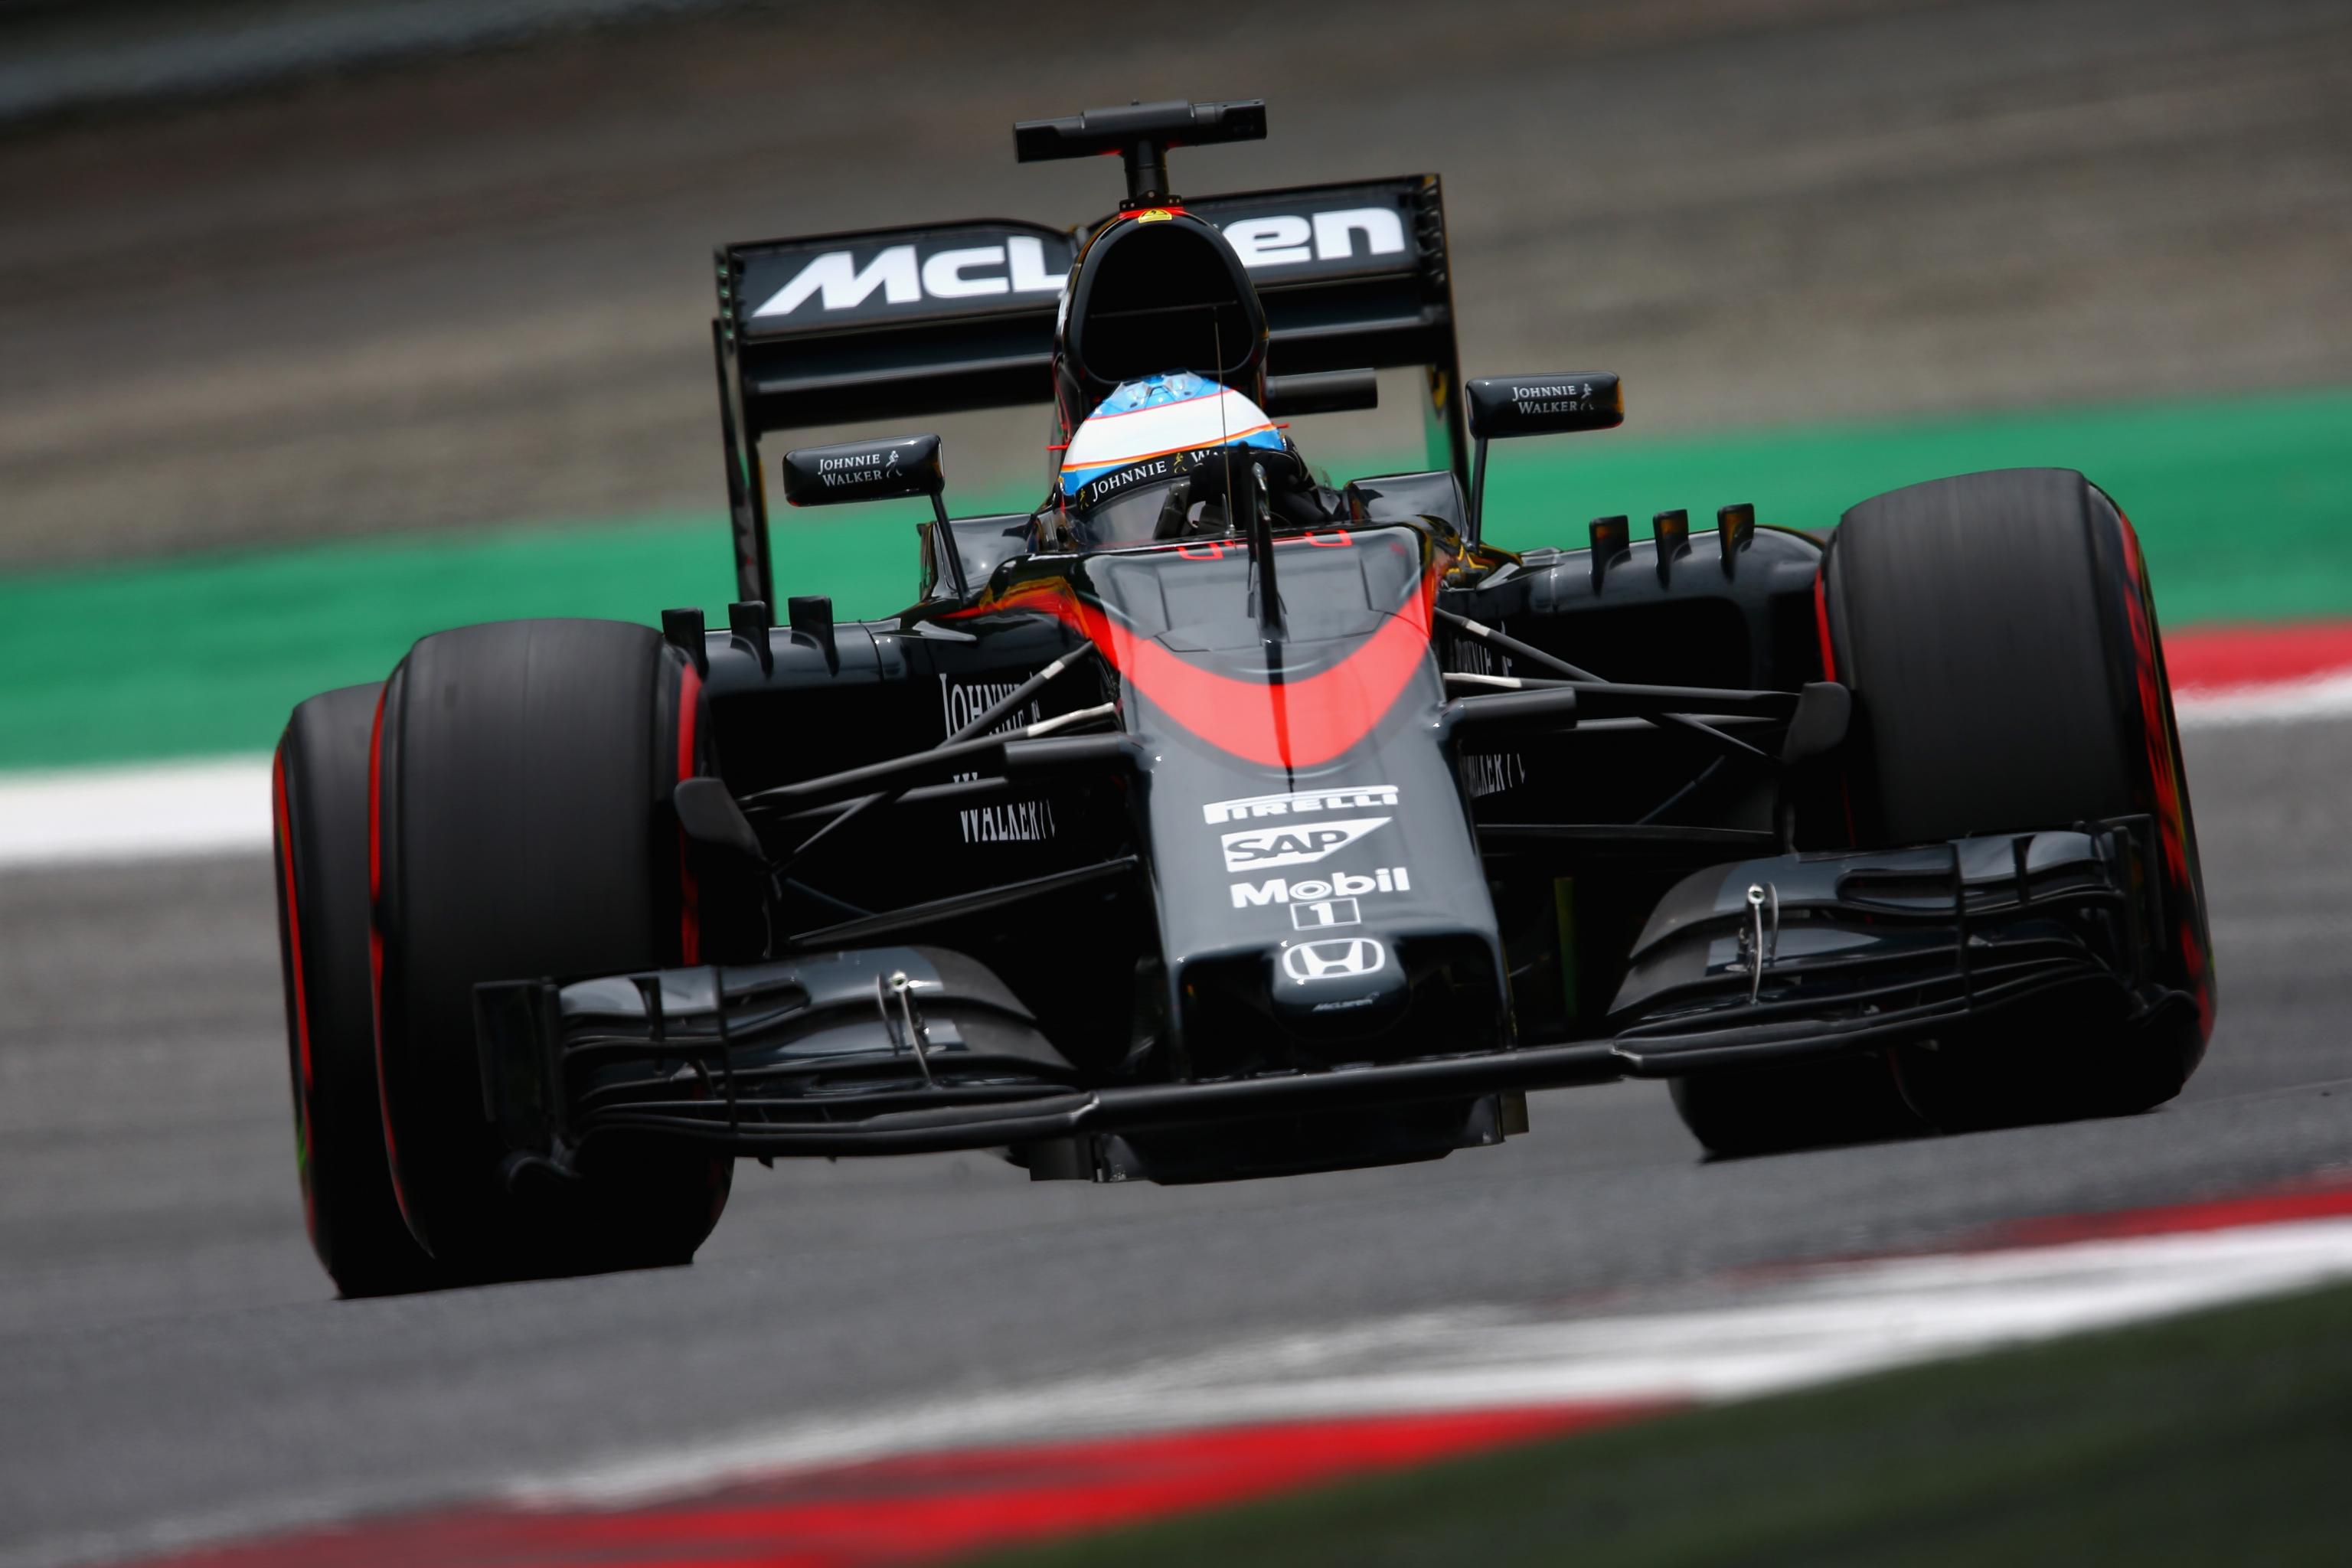 Why Mclaren S Problems In 15 F1 Season Are More Than Just A Lack Of Power Bleacher Report Latest News Videos And Highlights